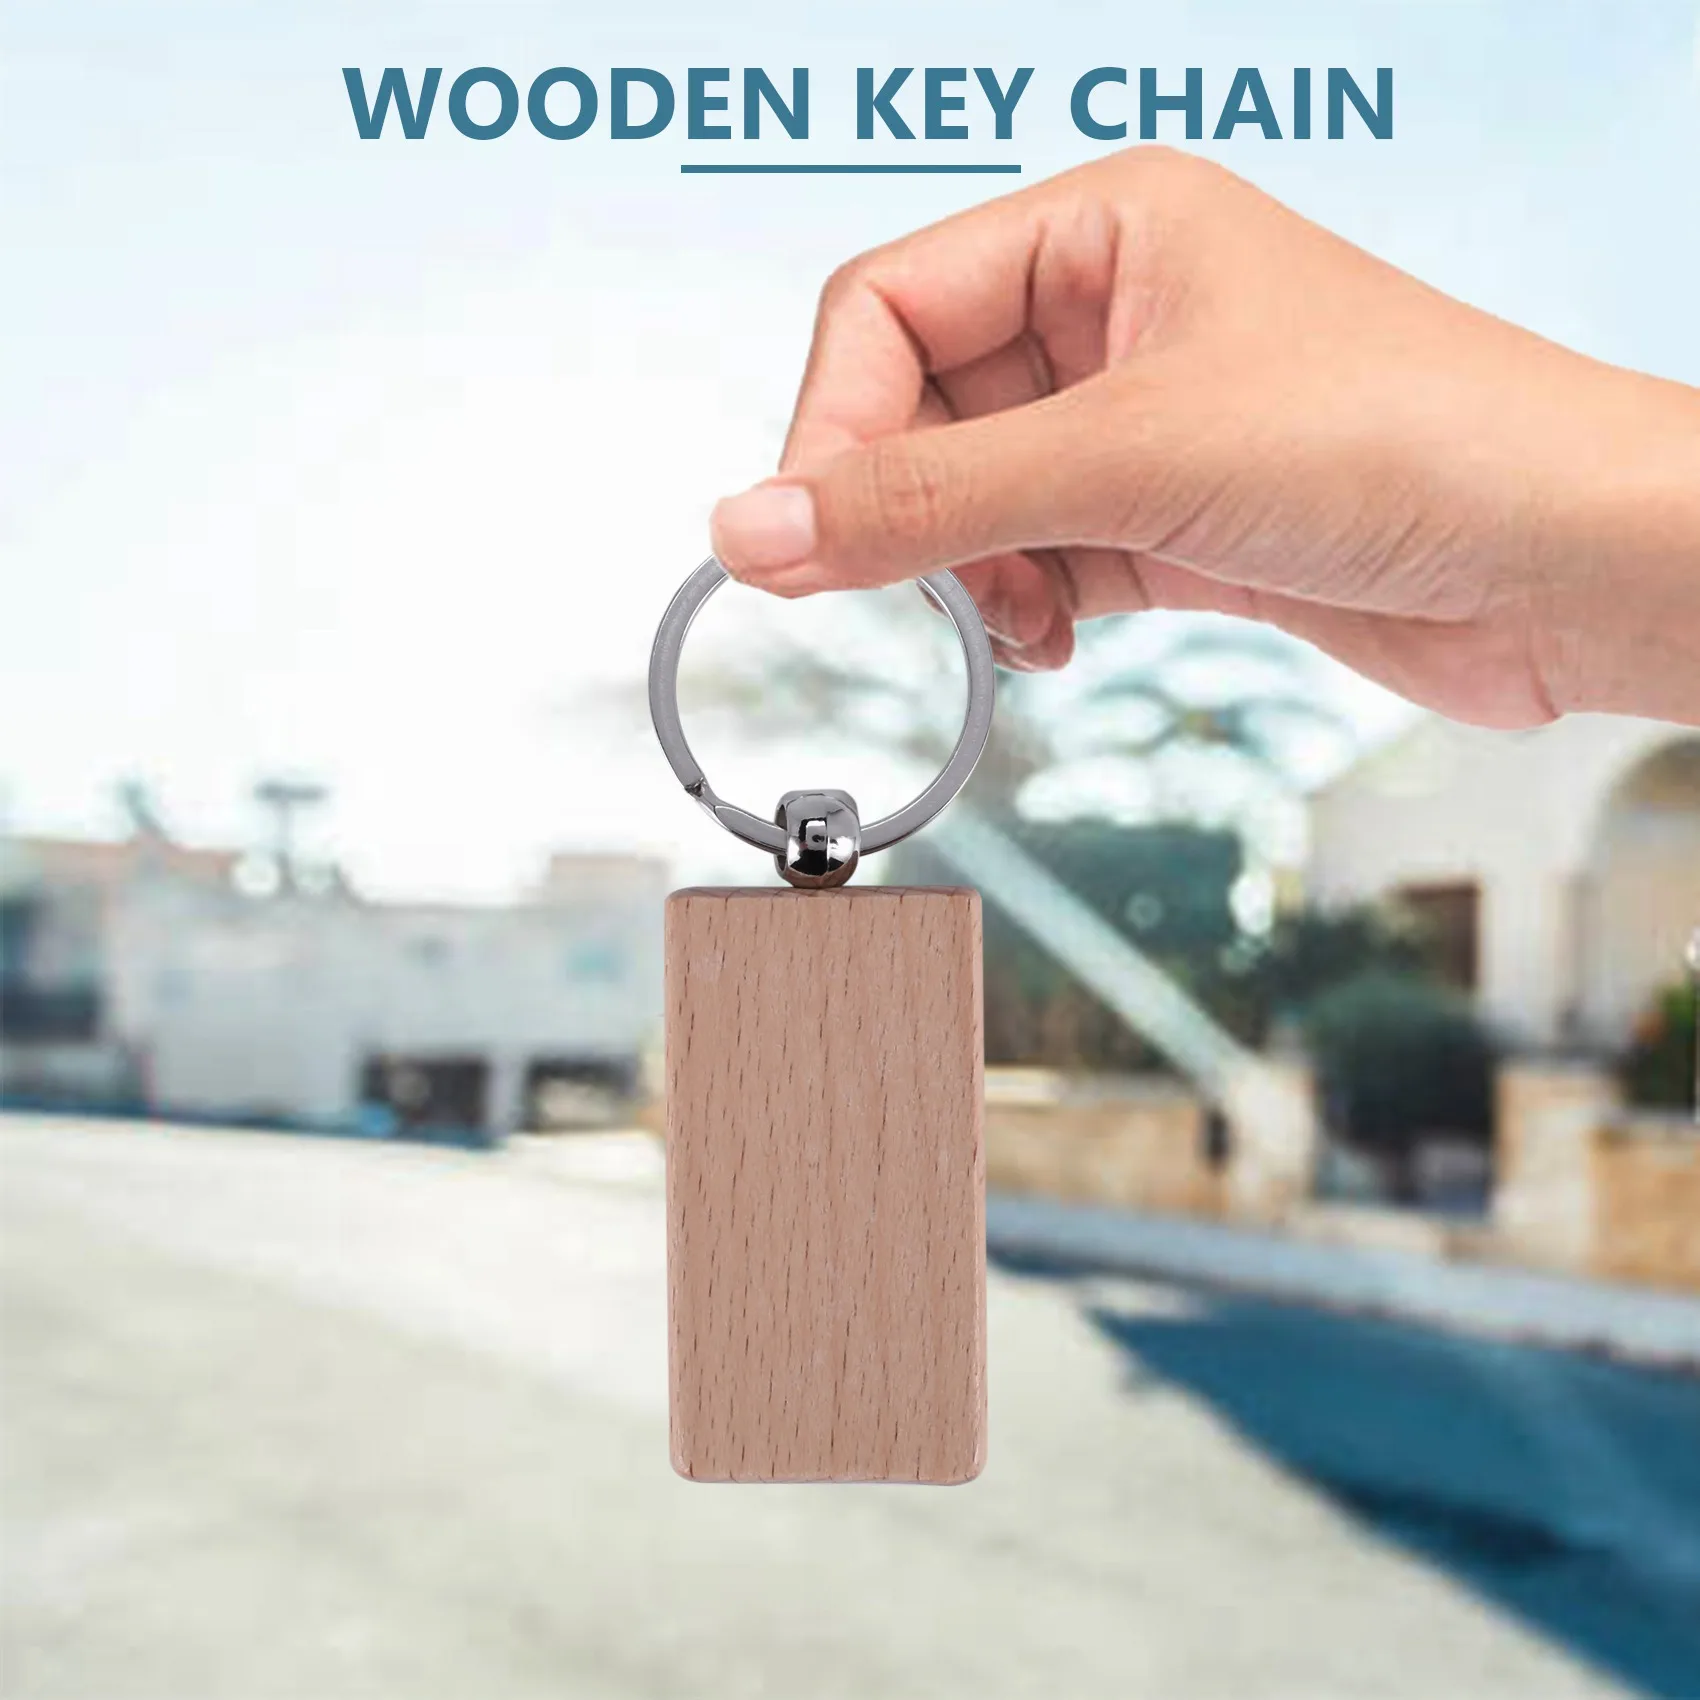 20Pcs Blank Wooden Wooden Keychain Diy Wooden Keychain Key Tag Anti-Lost  Wood Accessories Gift 